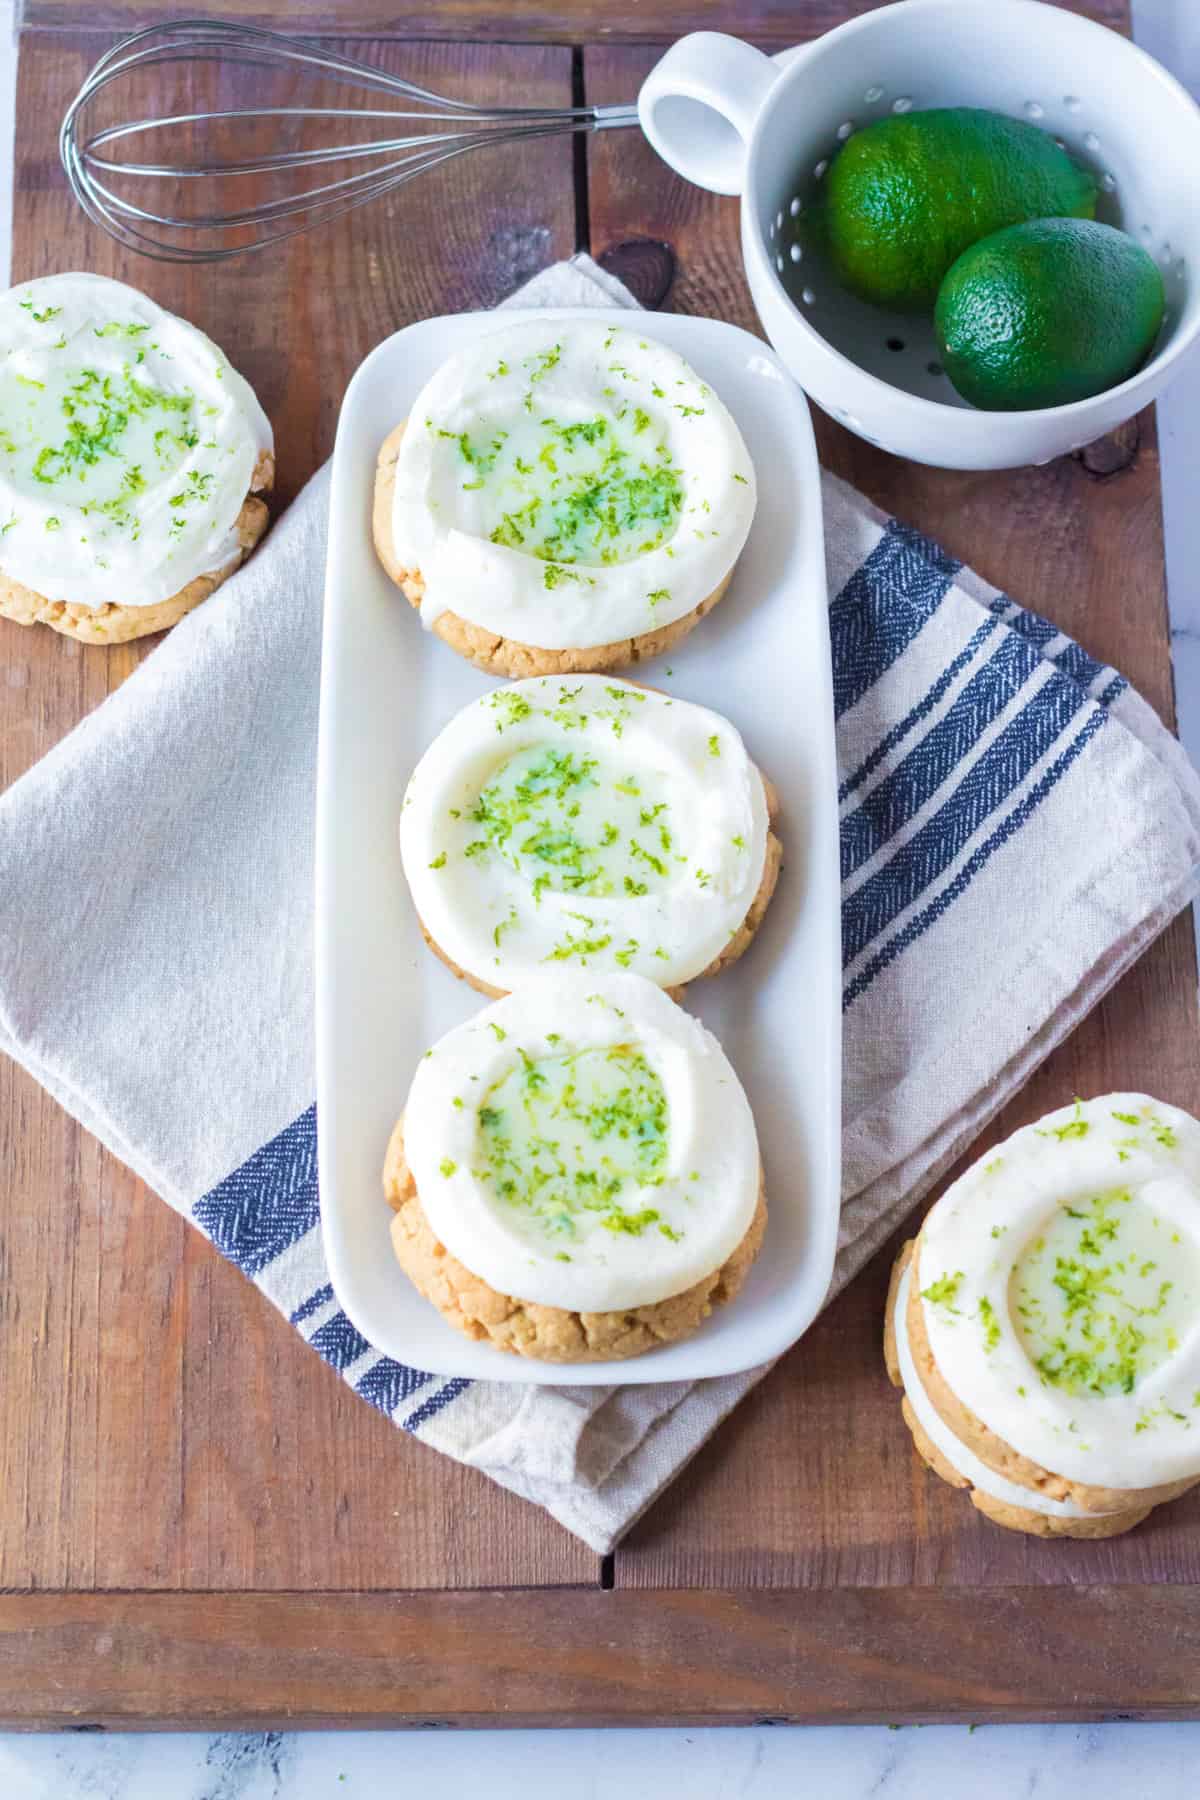 Several frosted key lime cookies are presented on and around a rectangular white plate.